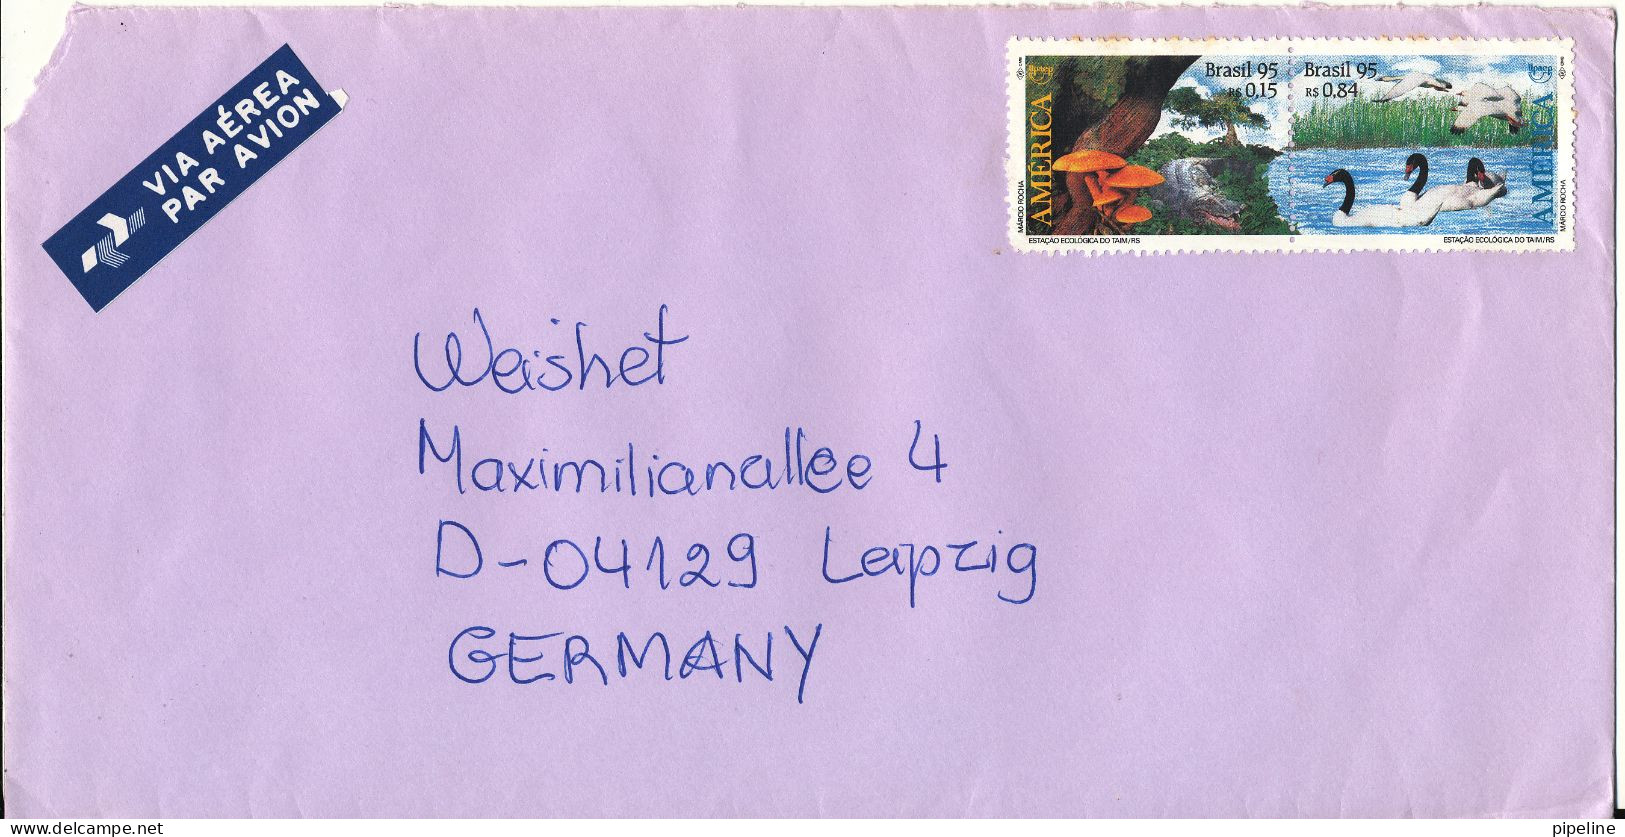 Brazil Cover Sent Air Mail To Germany No Postmark On Stamps Or Cover - Luftpost